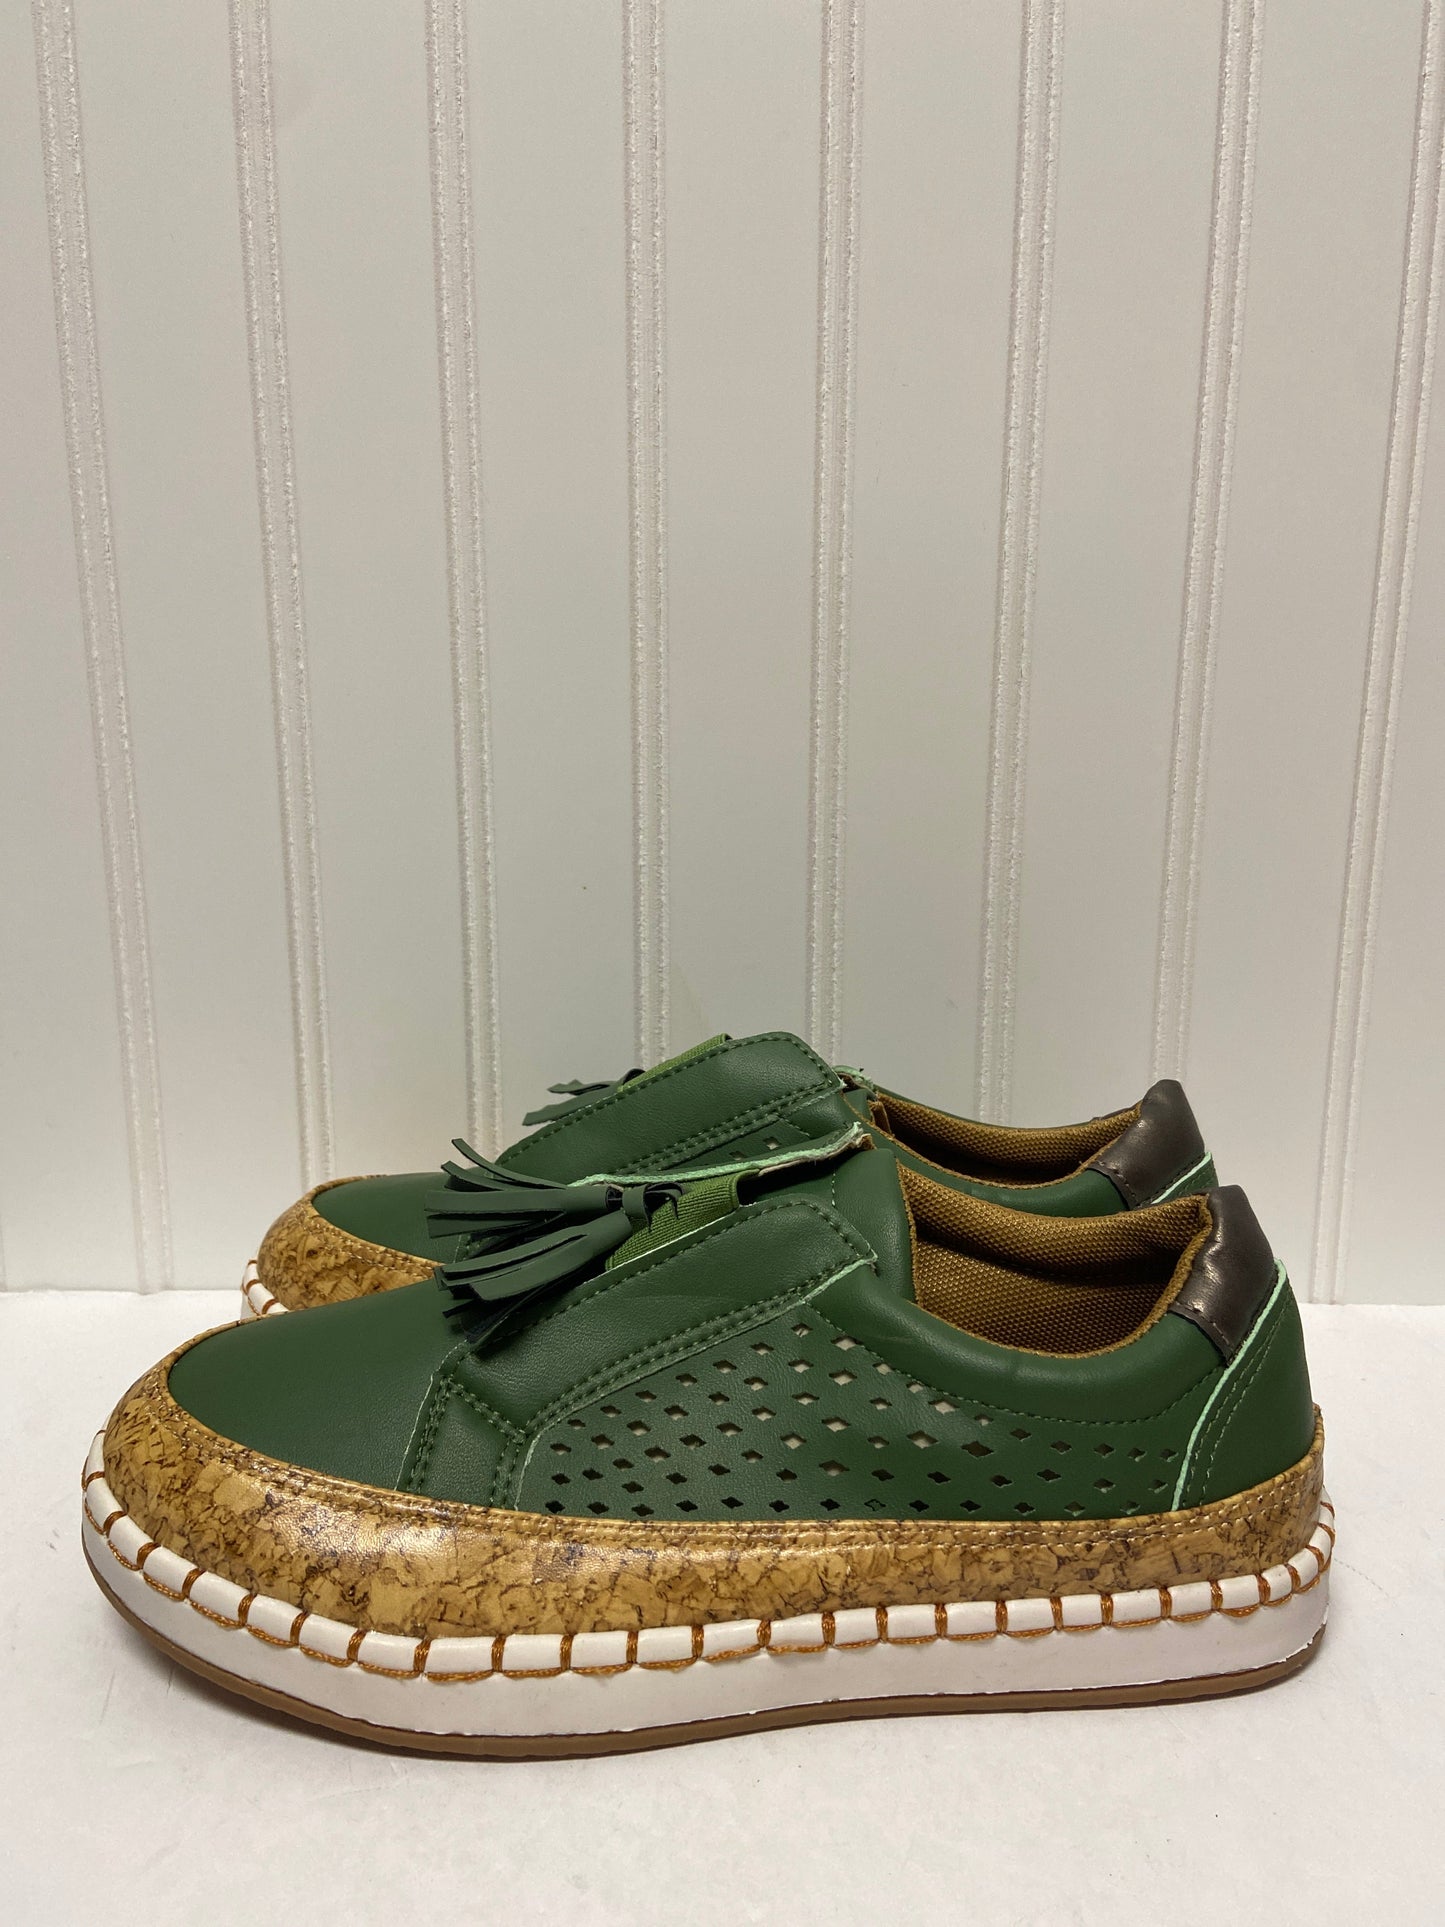 Green Shoes Flats Clothes Mentor, Size 7.5